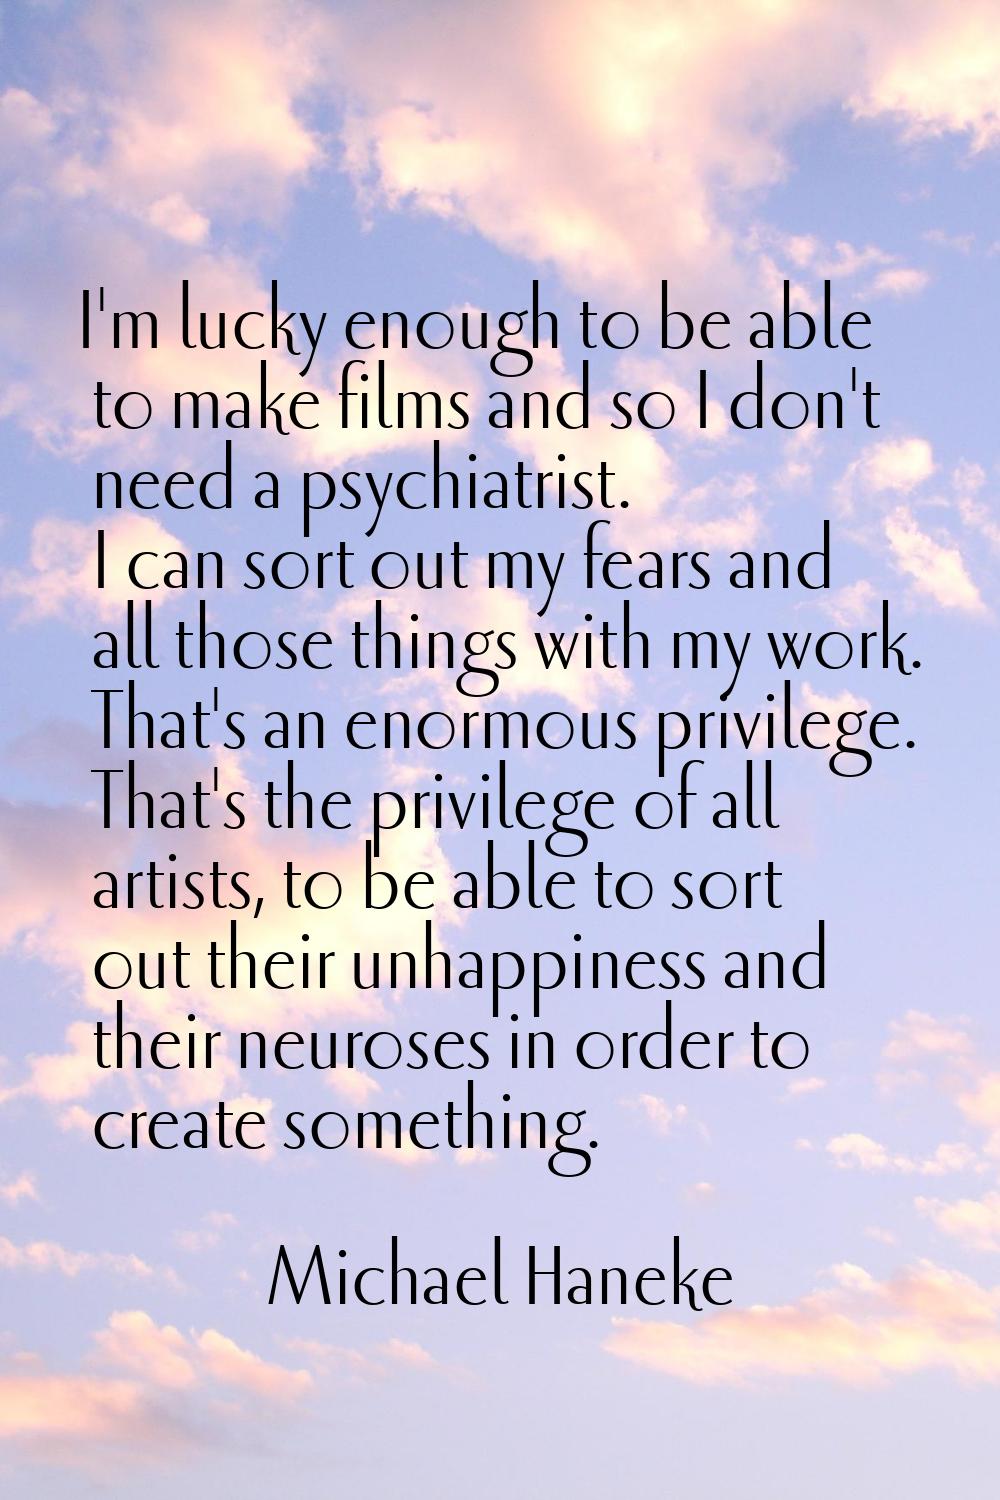 I'm lucky enough to be able to make films and so I don't need a psychiatrist. I can sort out my fea